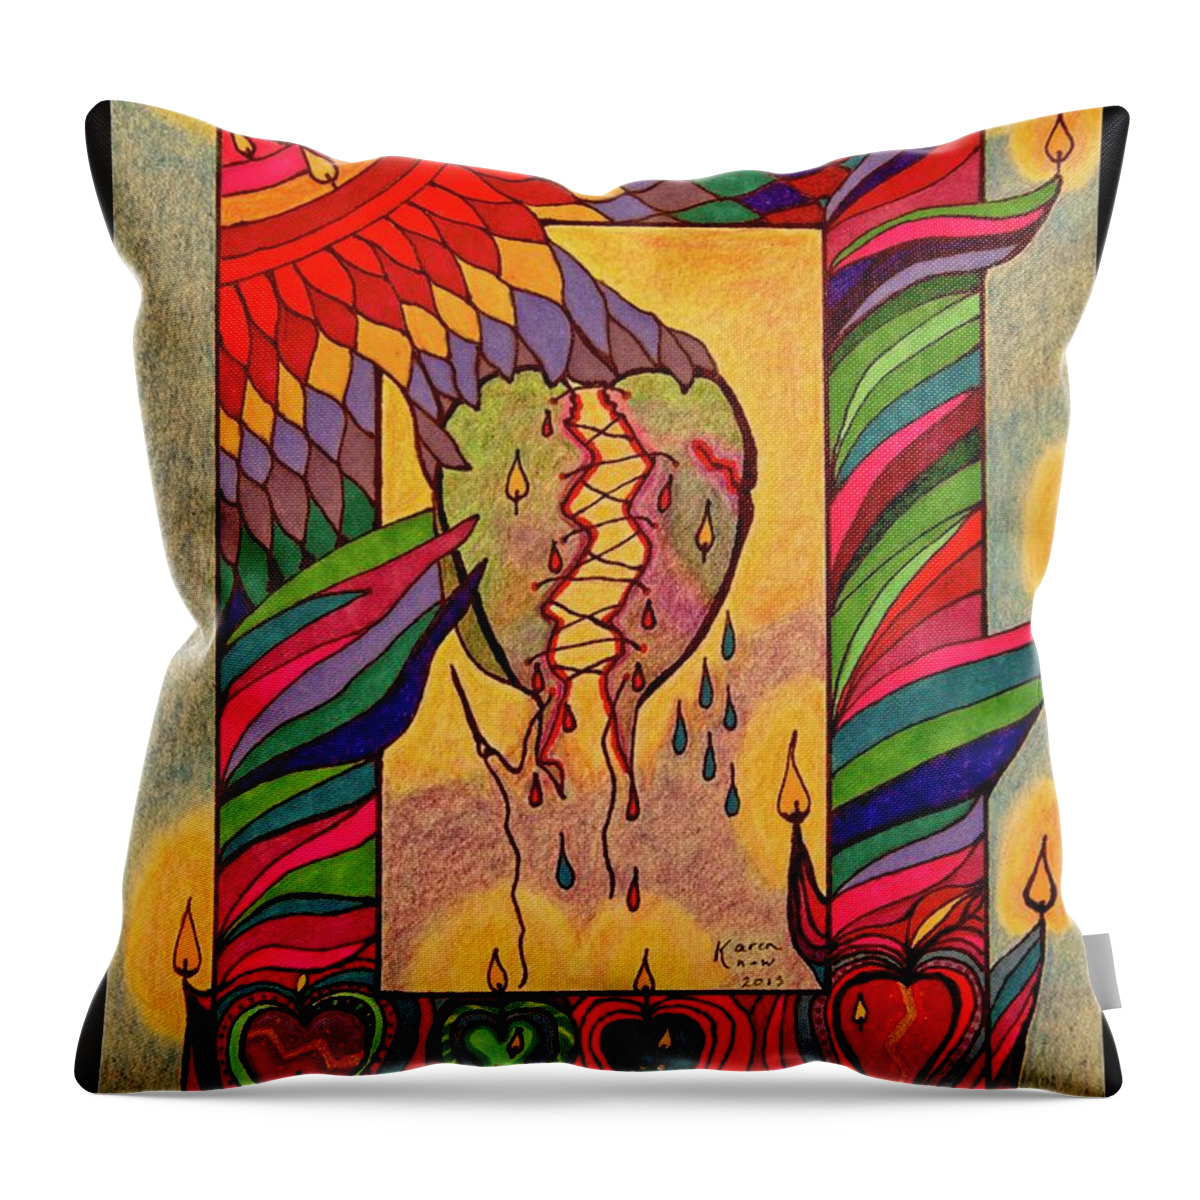 Love Throw Pillow featuring the drawing Love Heals by Karen Nice-Webb